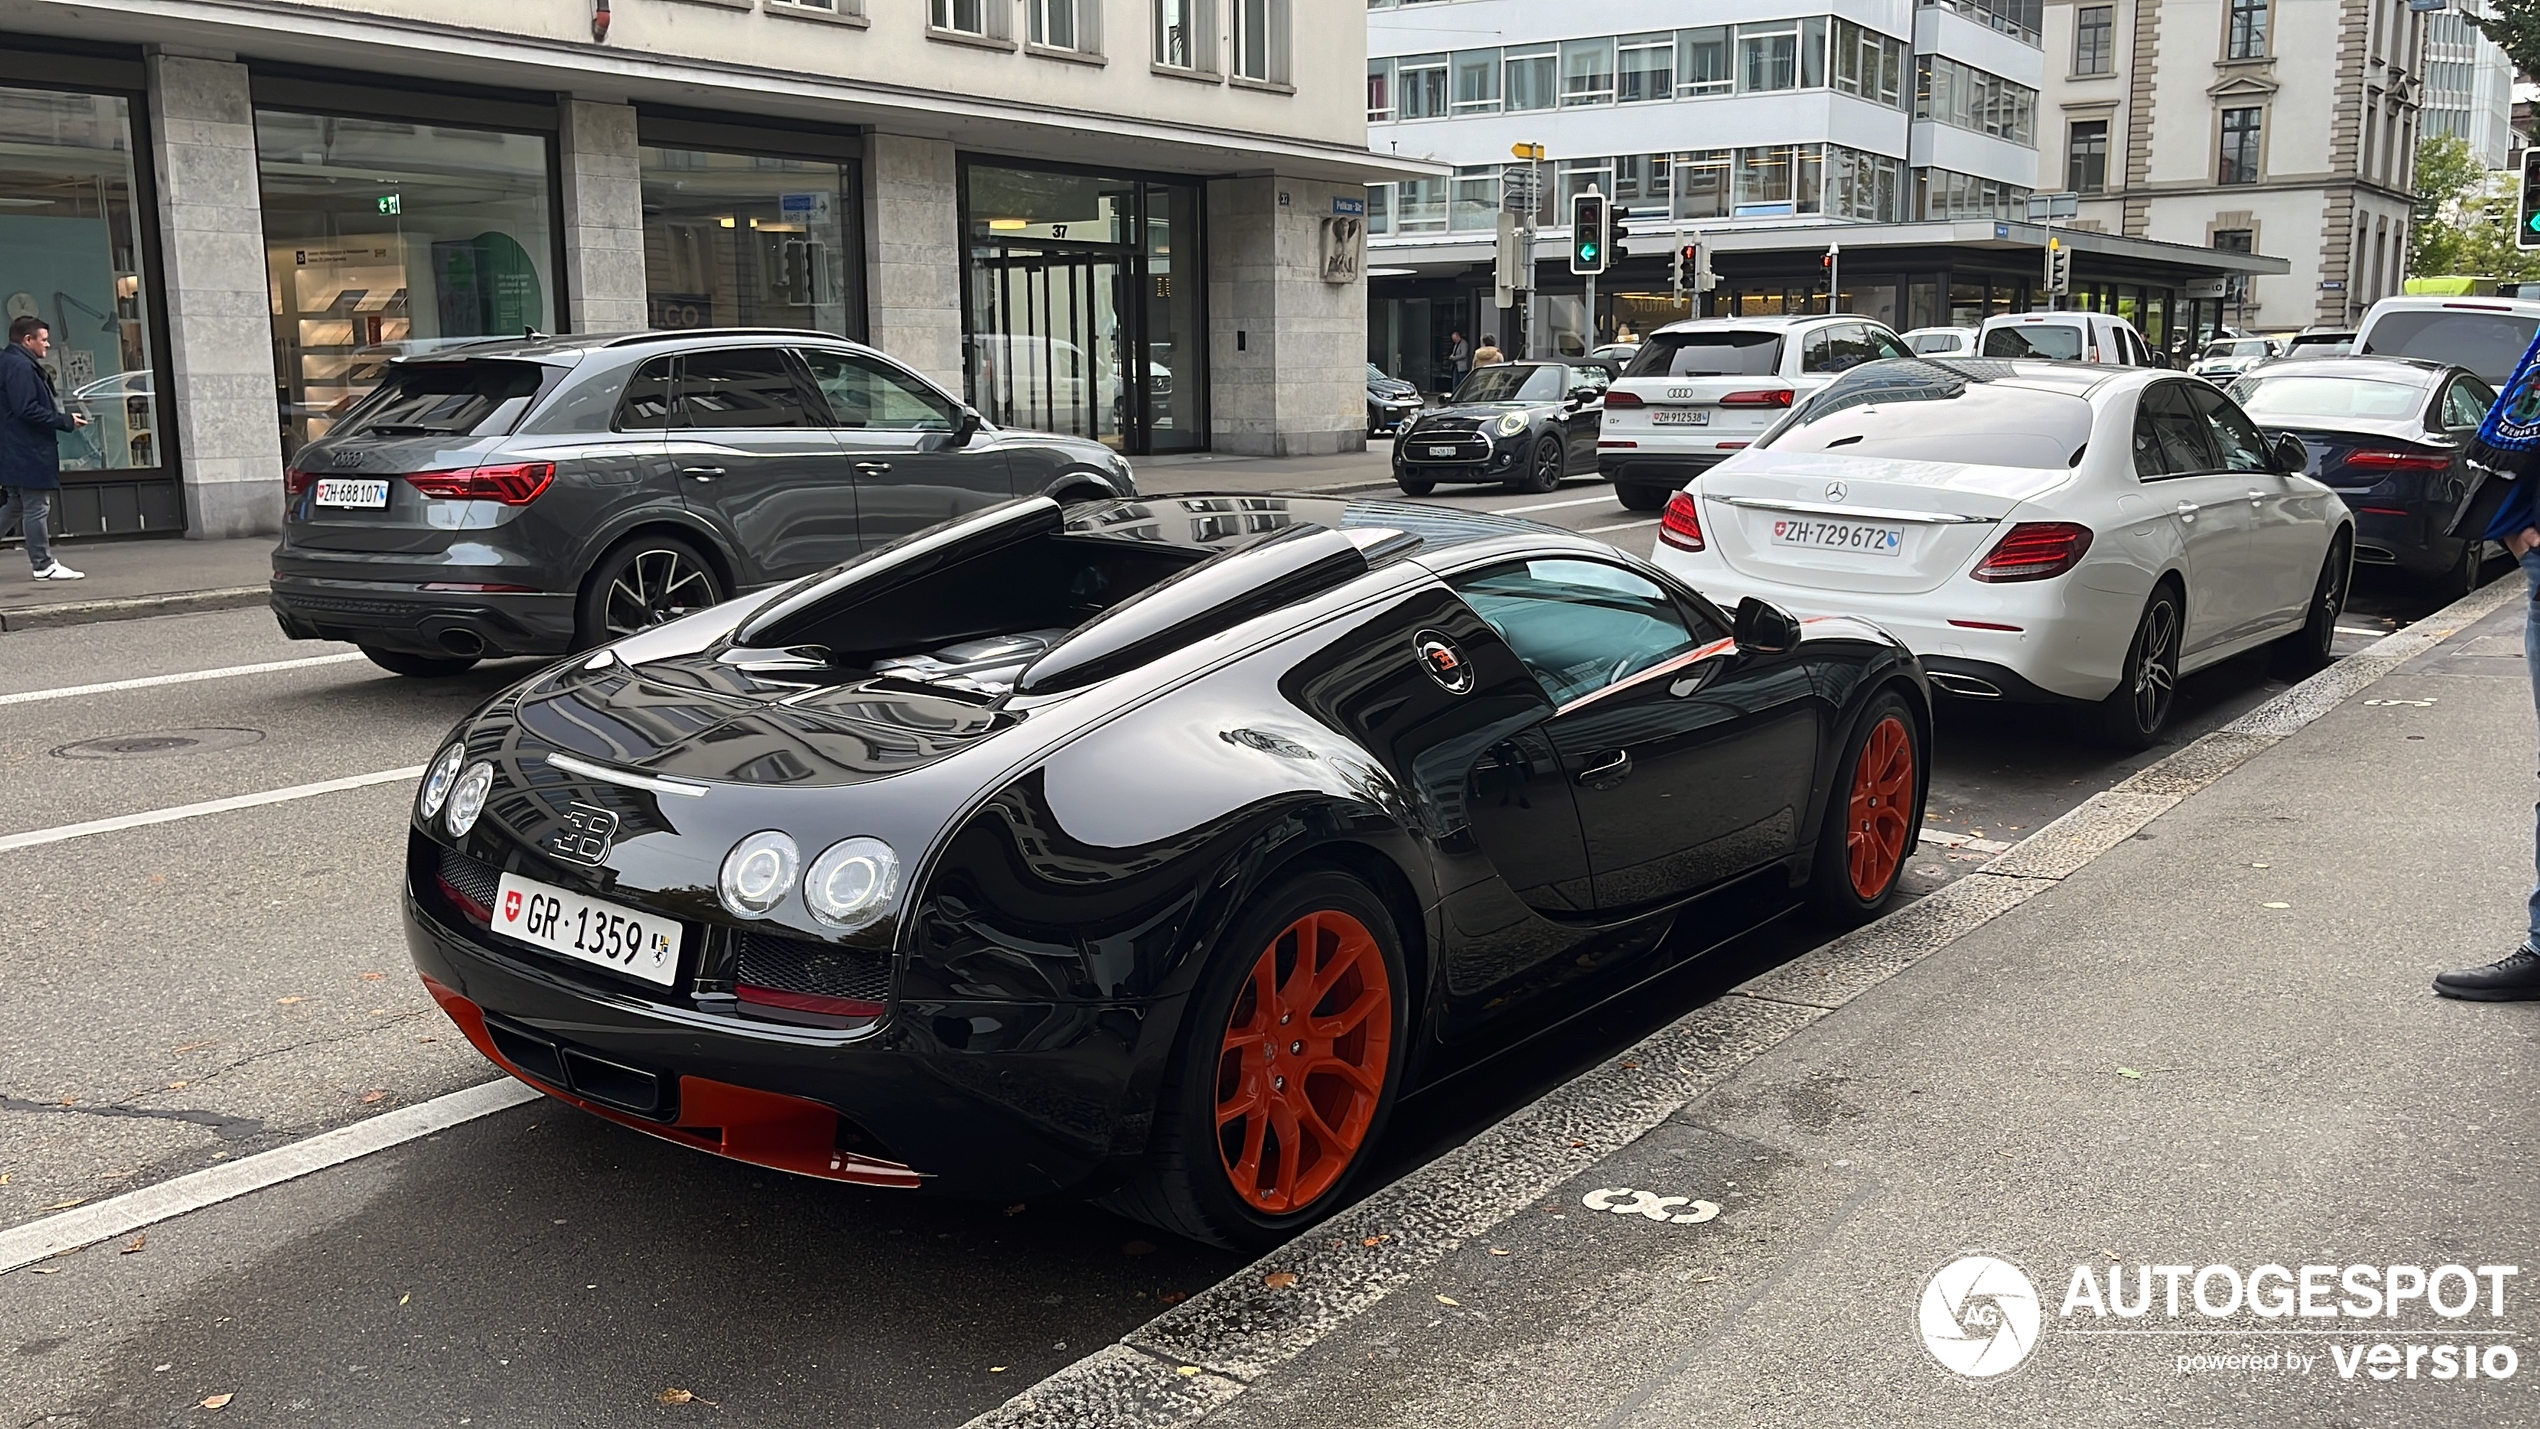 Another Bugatti Spotted in the City of Zurich